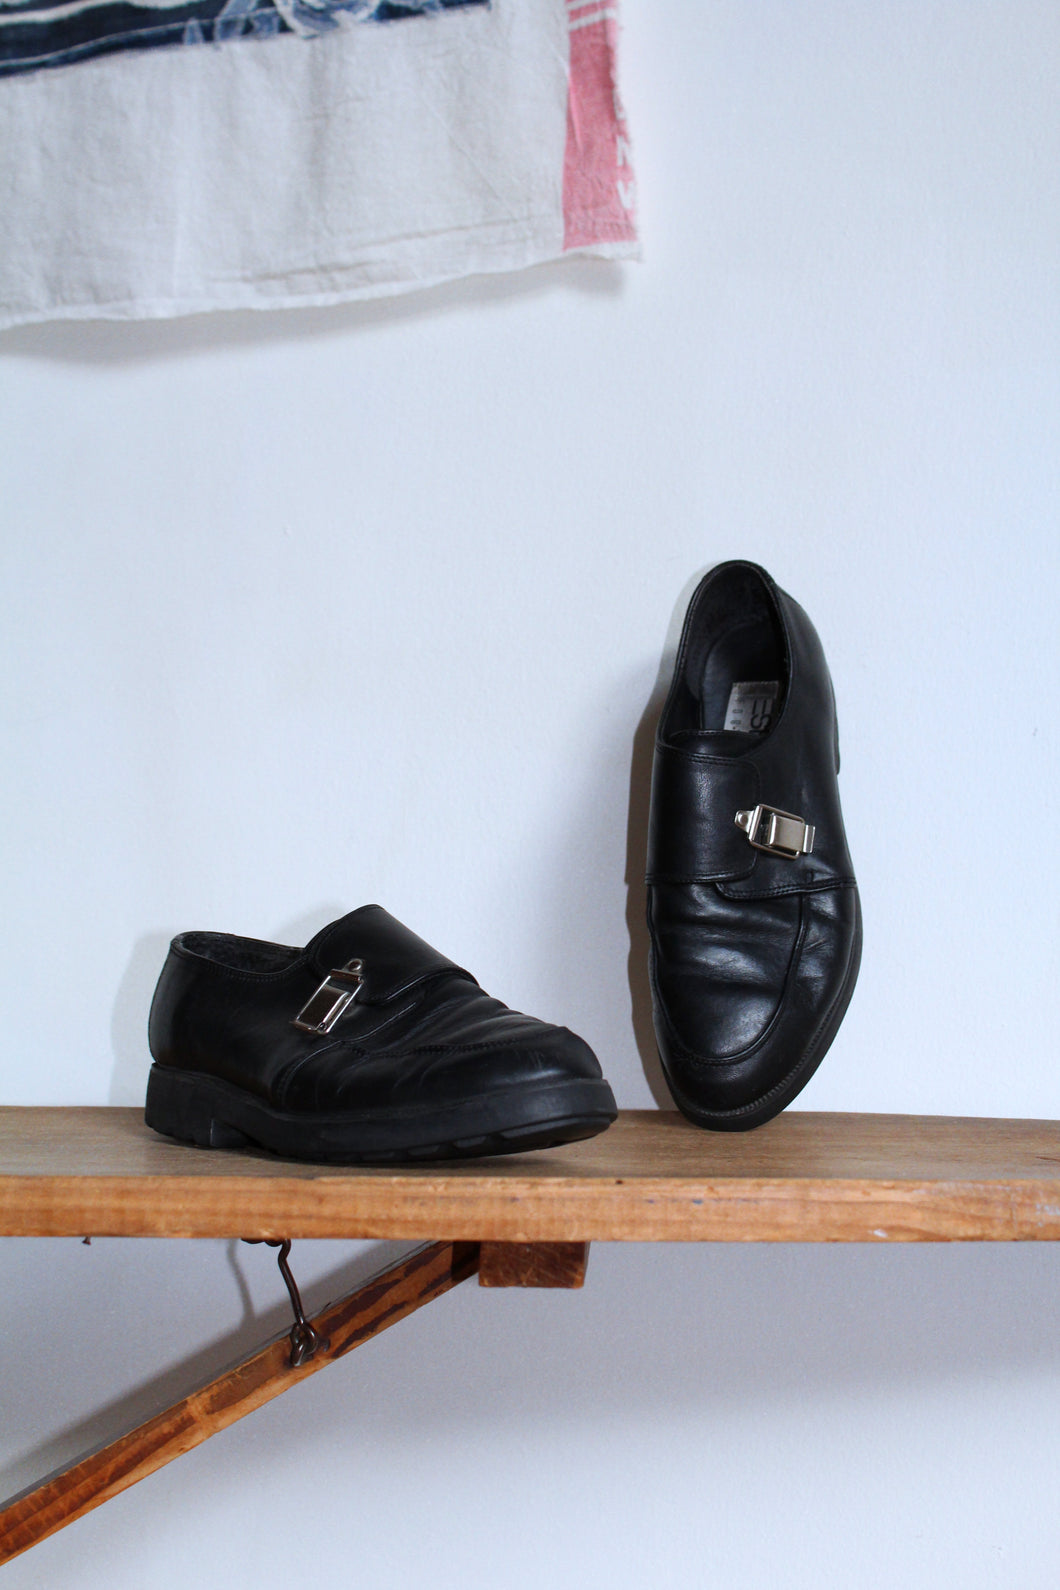 1990s Black Leather ESPRIT Footwear Silver Buckle Loafers - Size 8.5